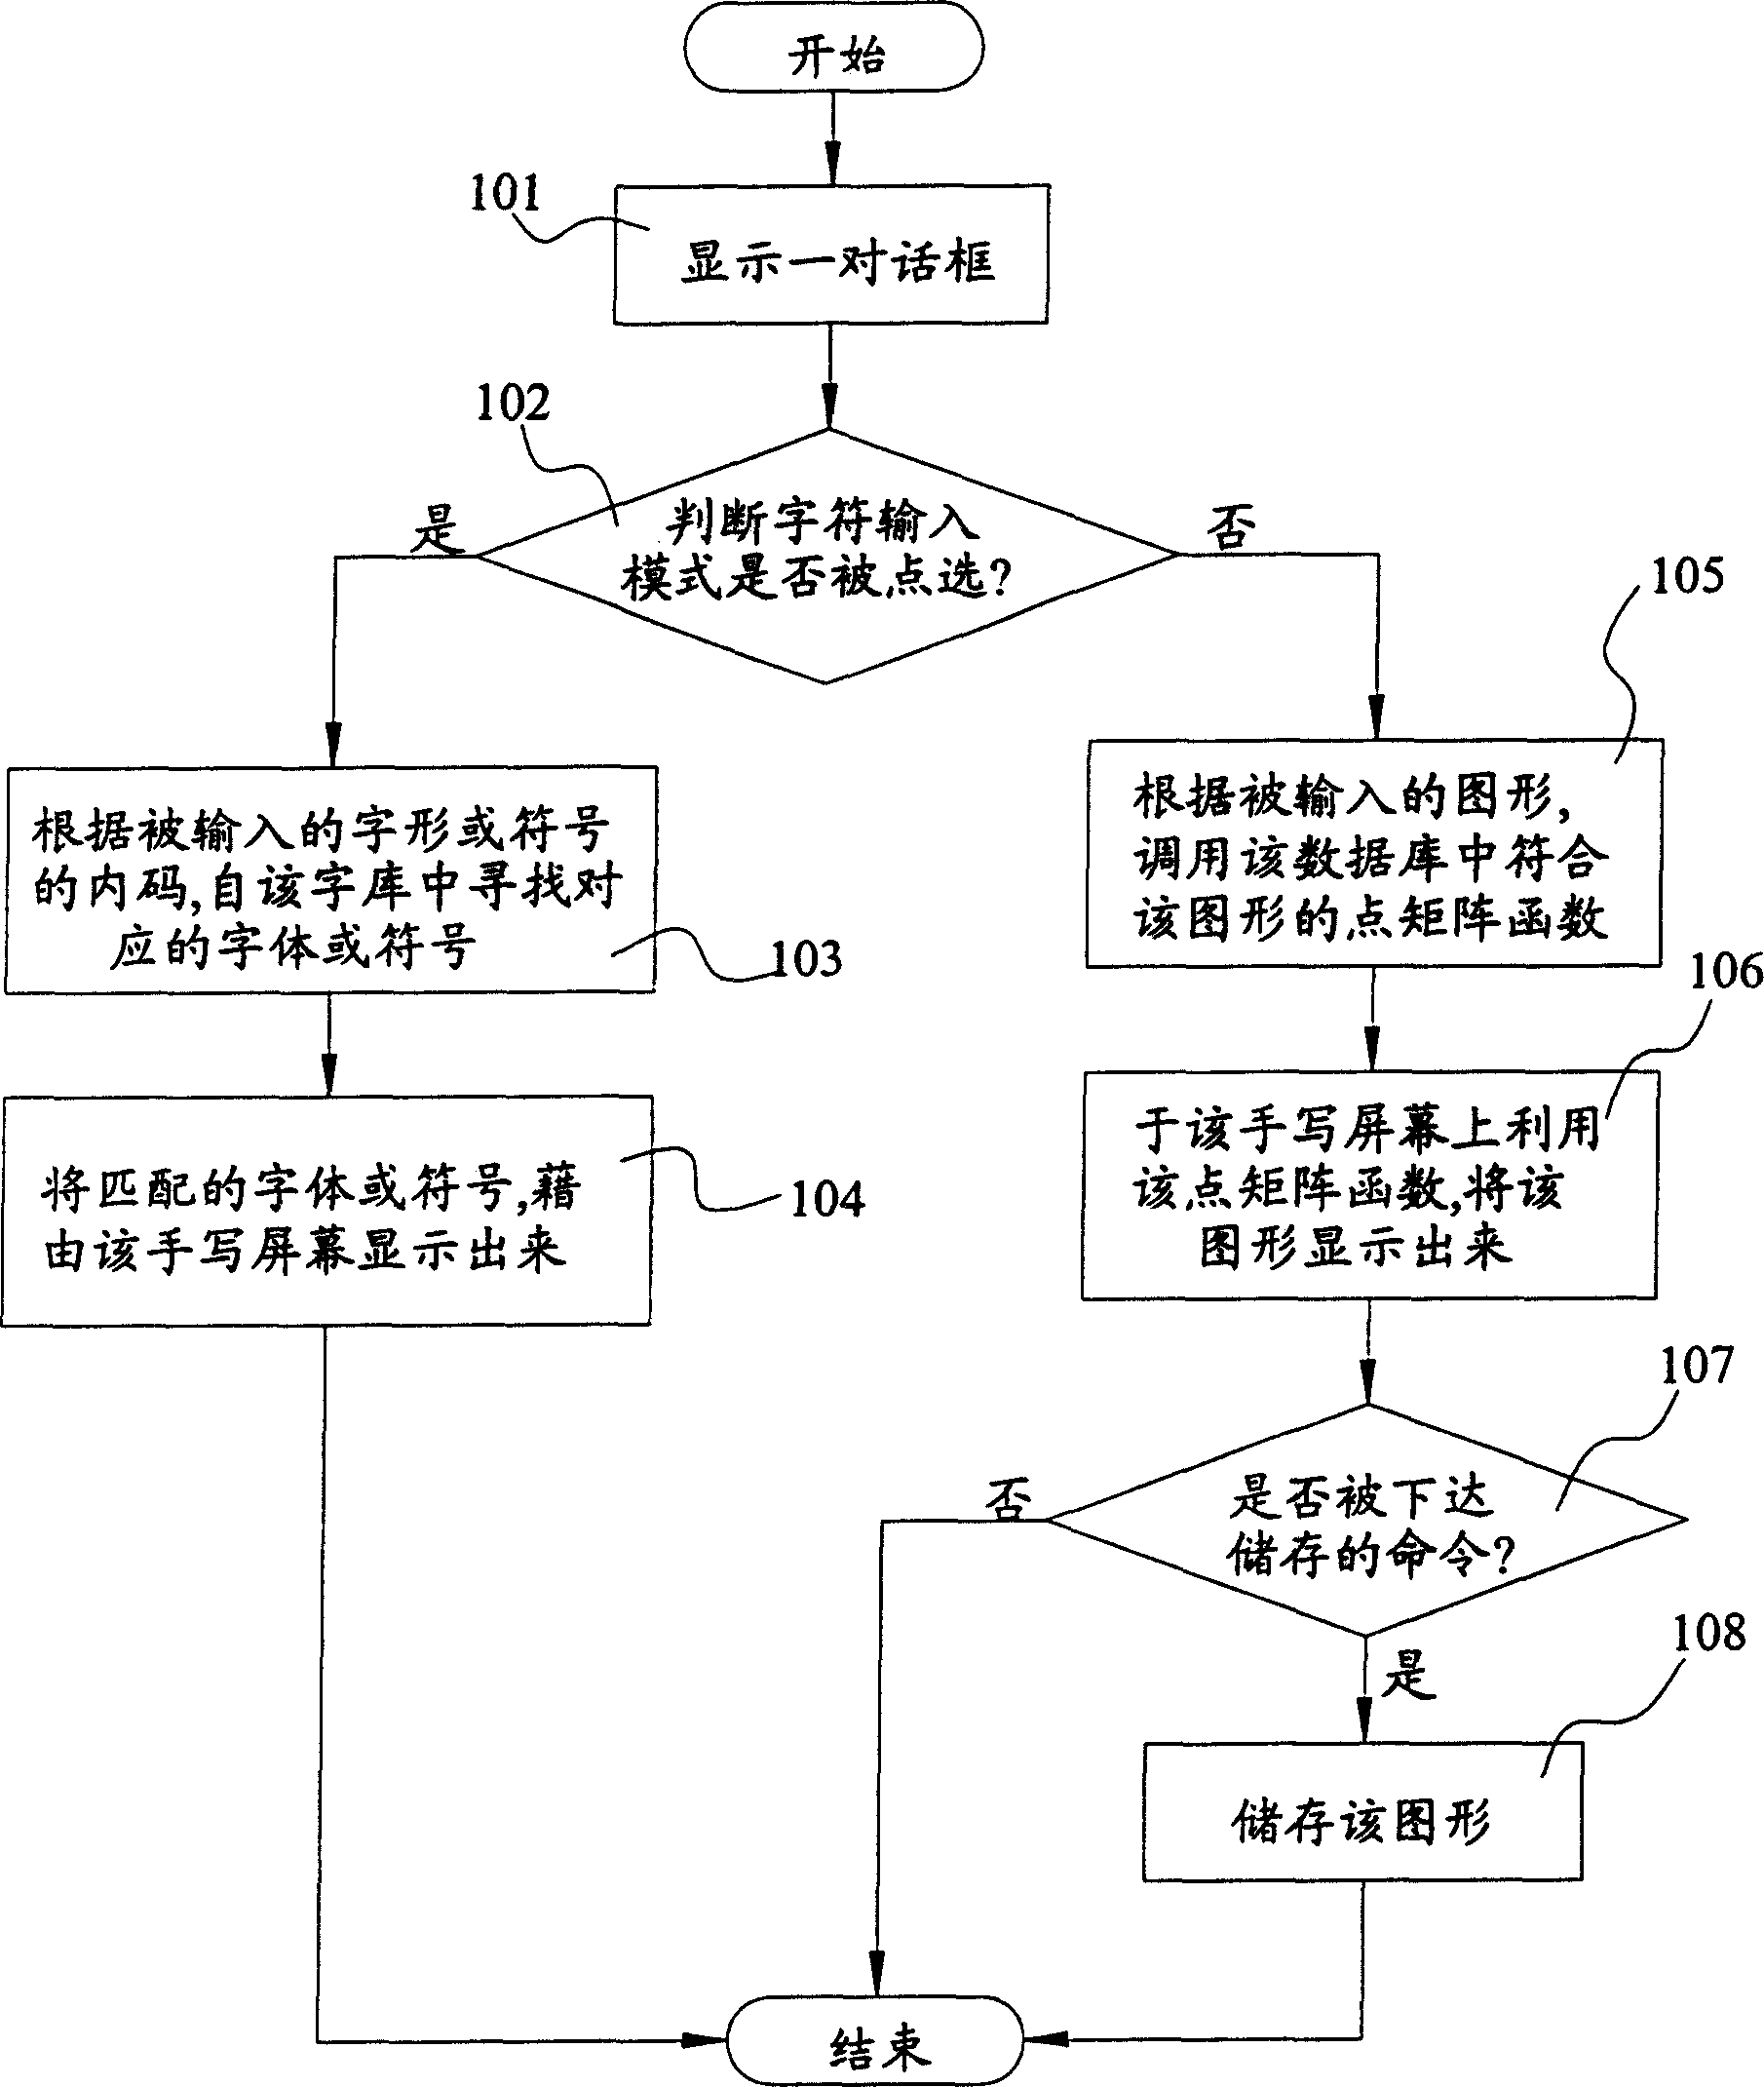 Method for making mobile phone handwriting screen concurrently have character input and graphic input